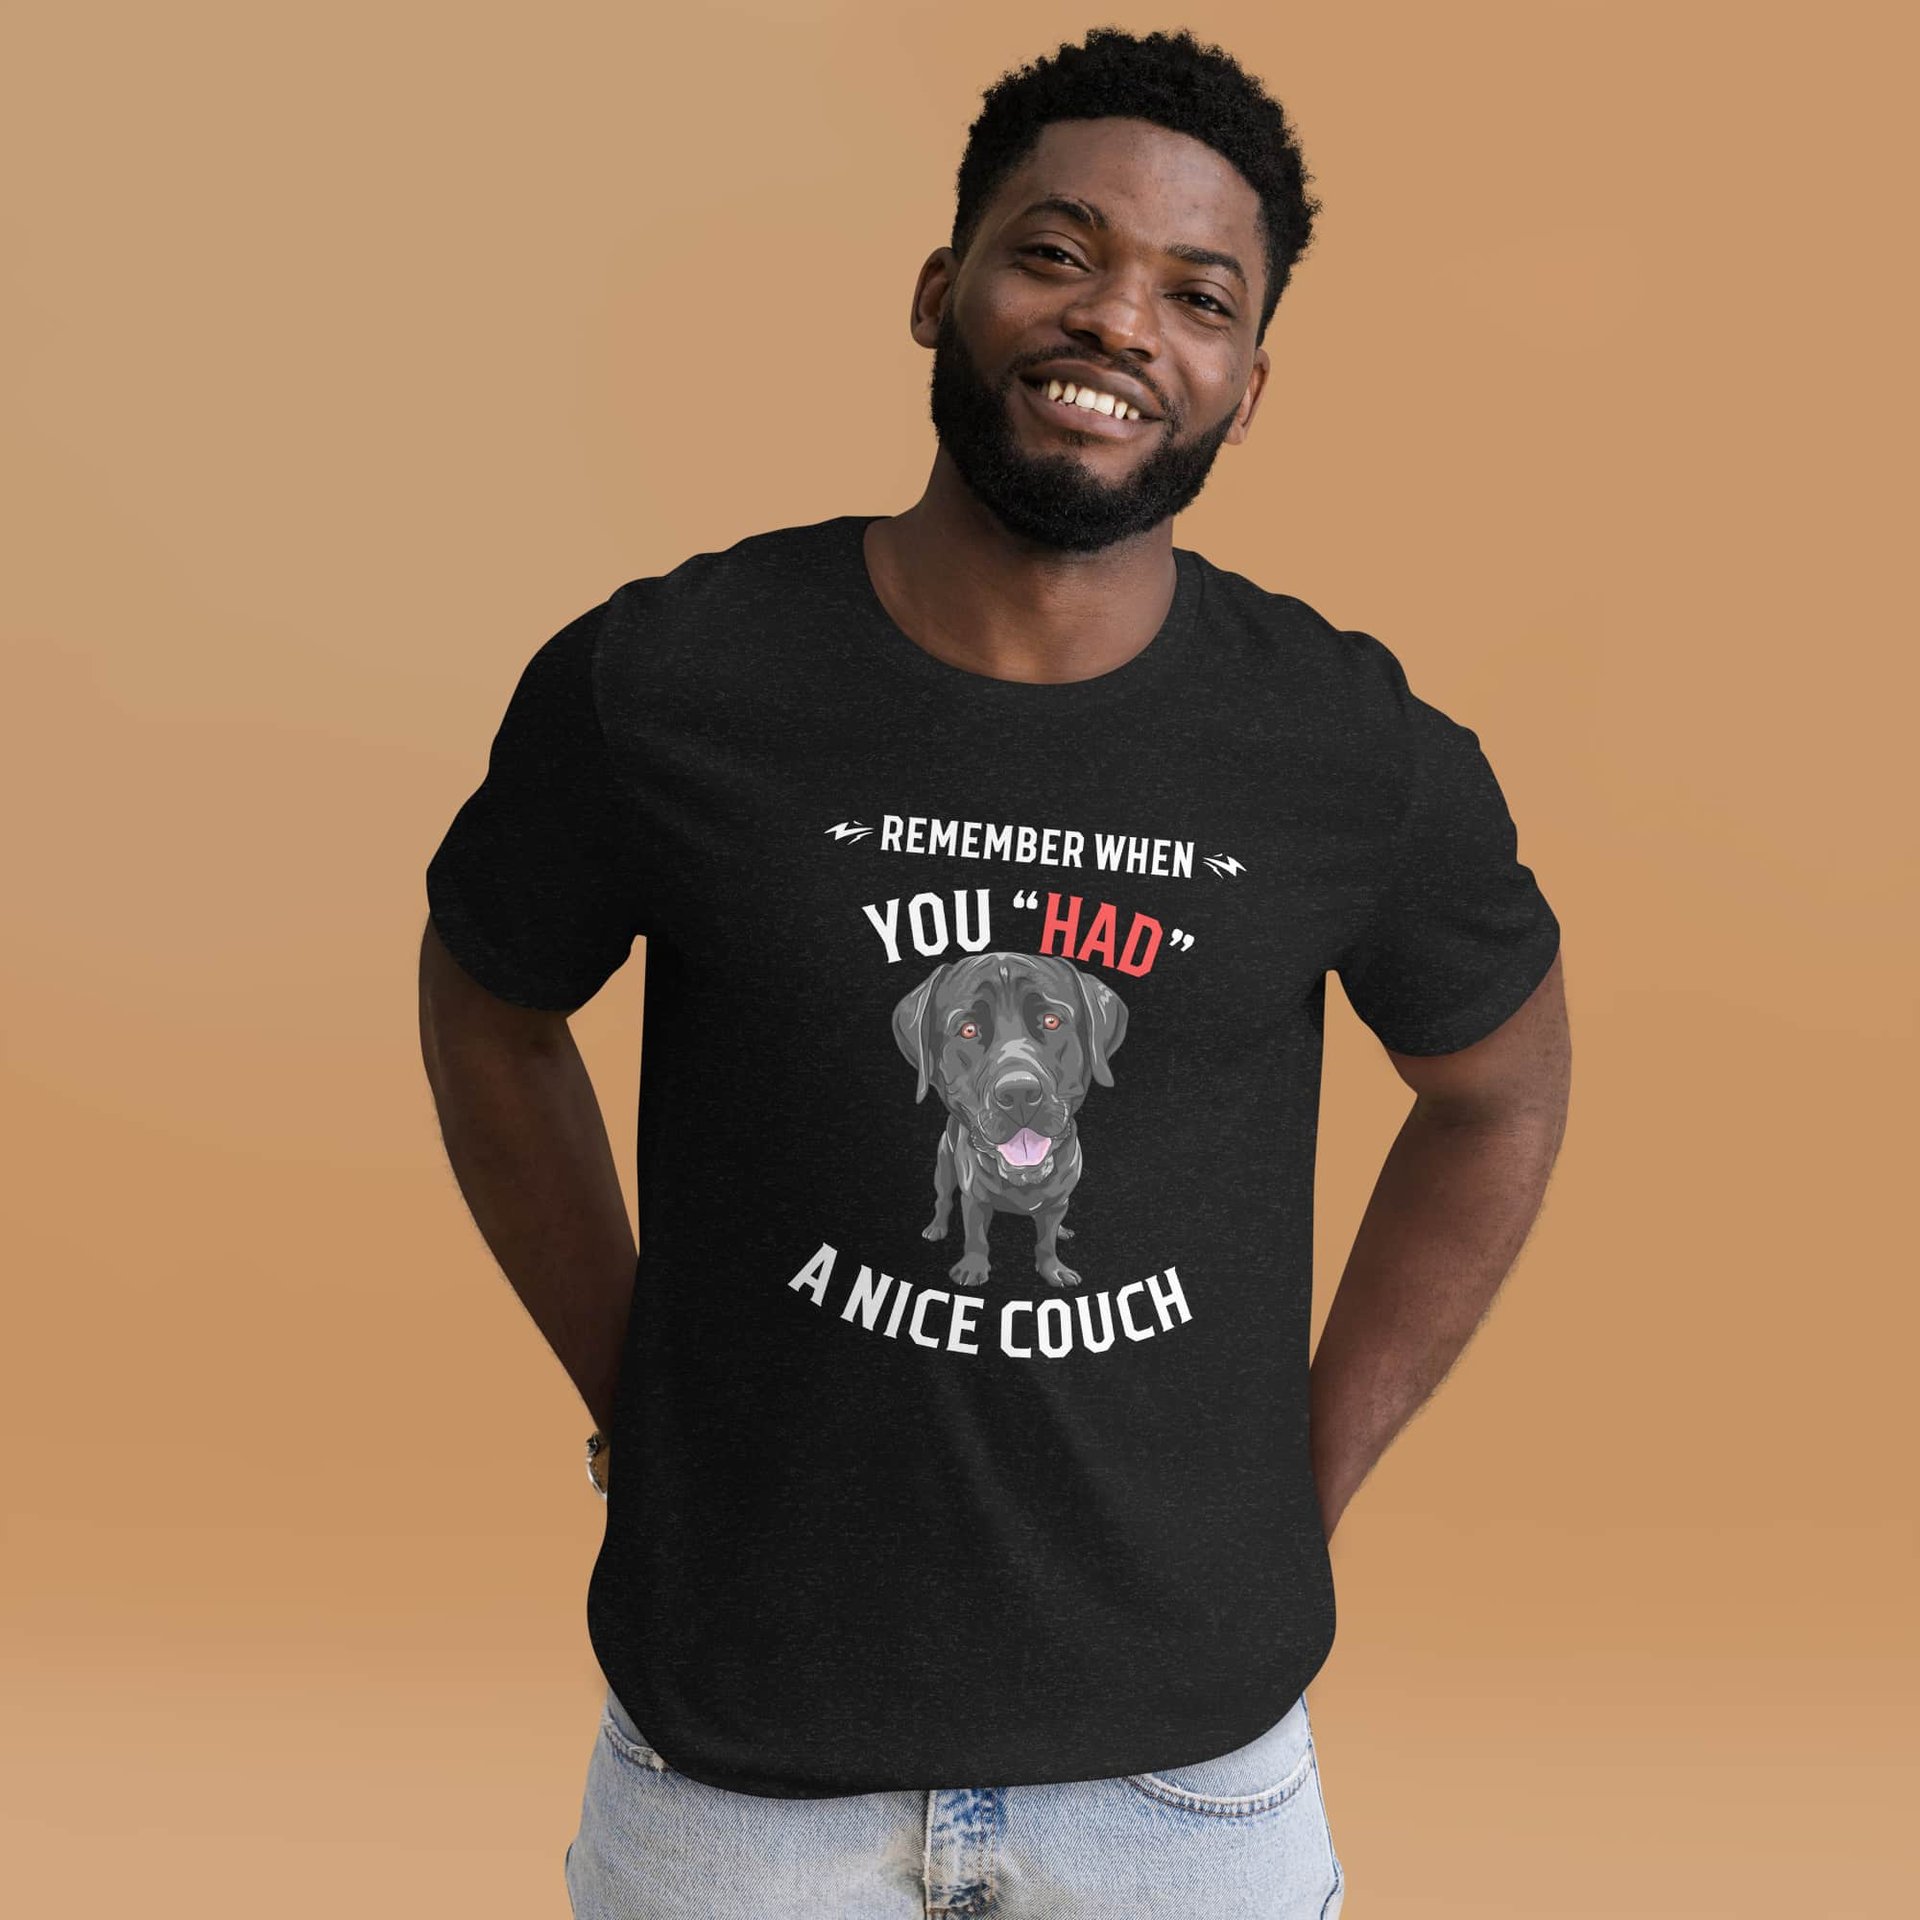 "Remember When You Had A Nice Couch" Funny Labrador Retriever Unisex T-Shirt male t